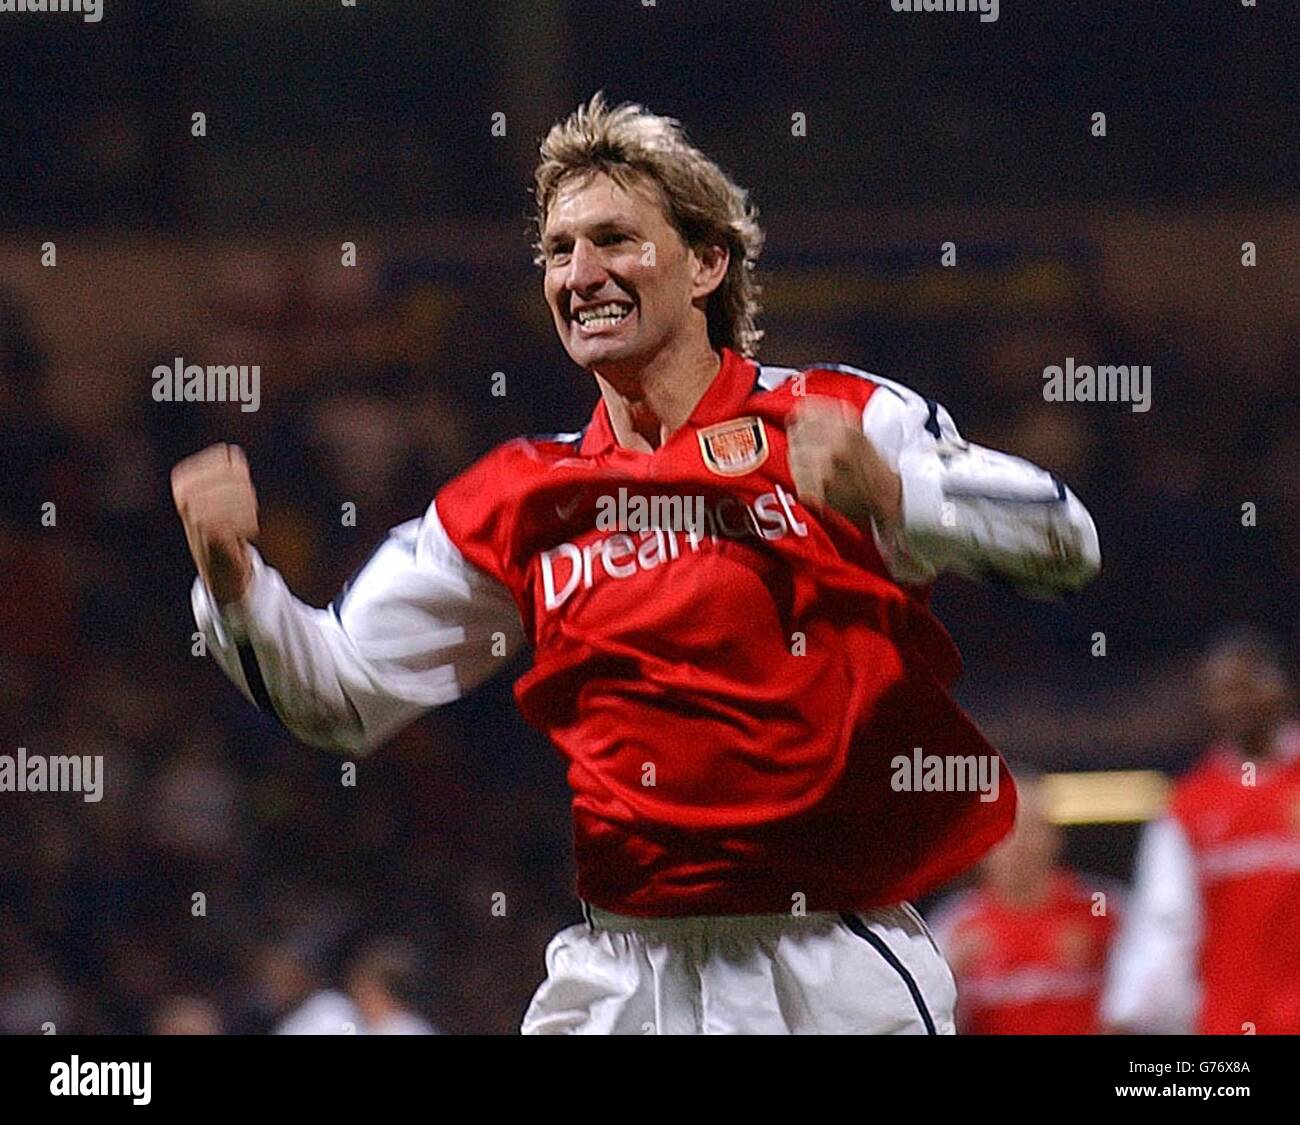 Arsenal Captain Tony Adams shows his delight as Arsenal beat Bolton 2.0 in their Barclaycard Premiership Match at the Reebok Stadium. Stock Photo